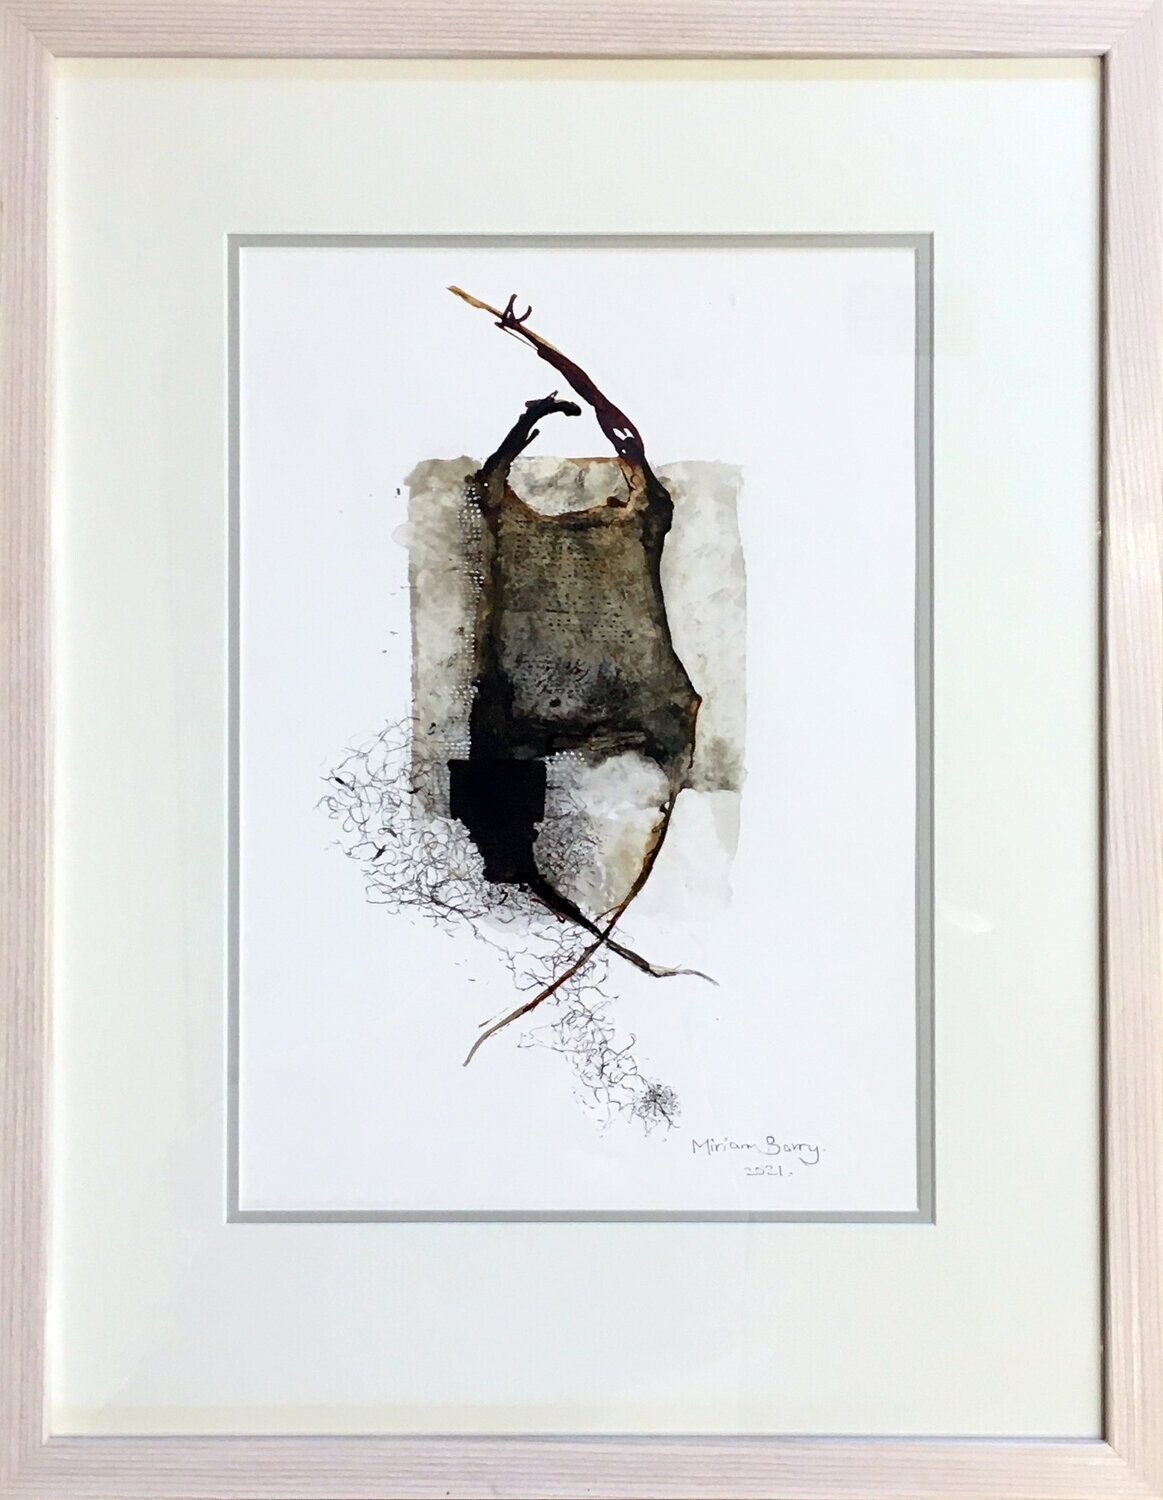 Miriam Barry, 'Equipoise', framed